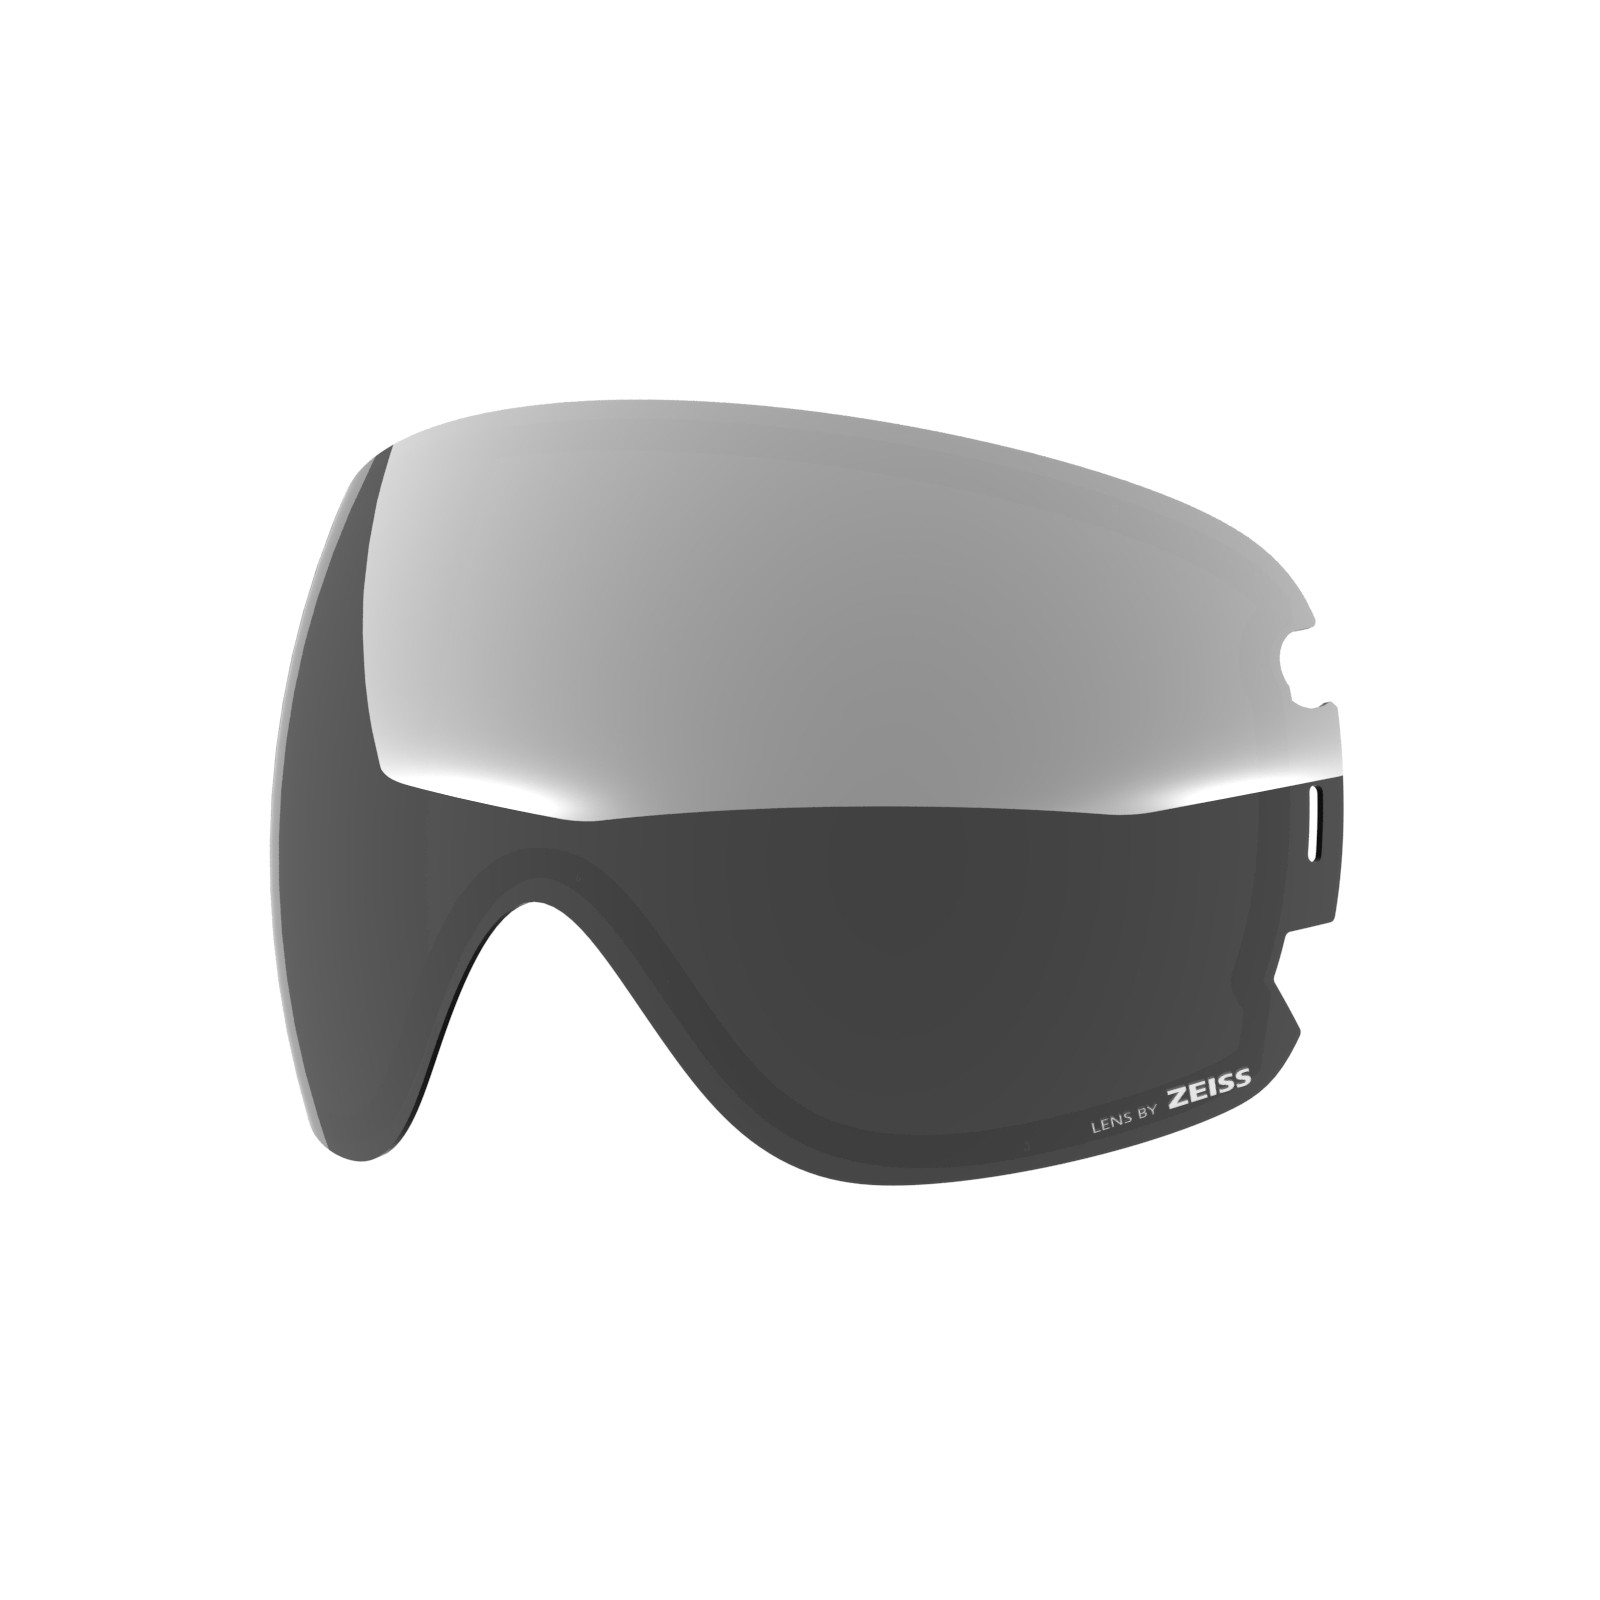 Silver lens for Open XL goggle